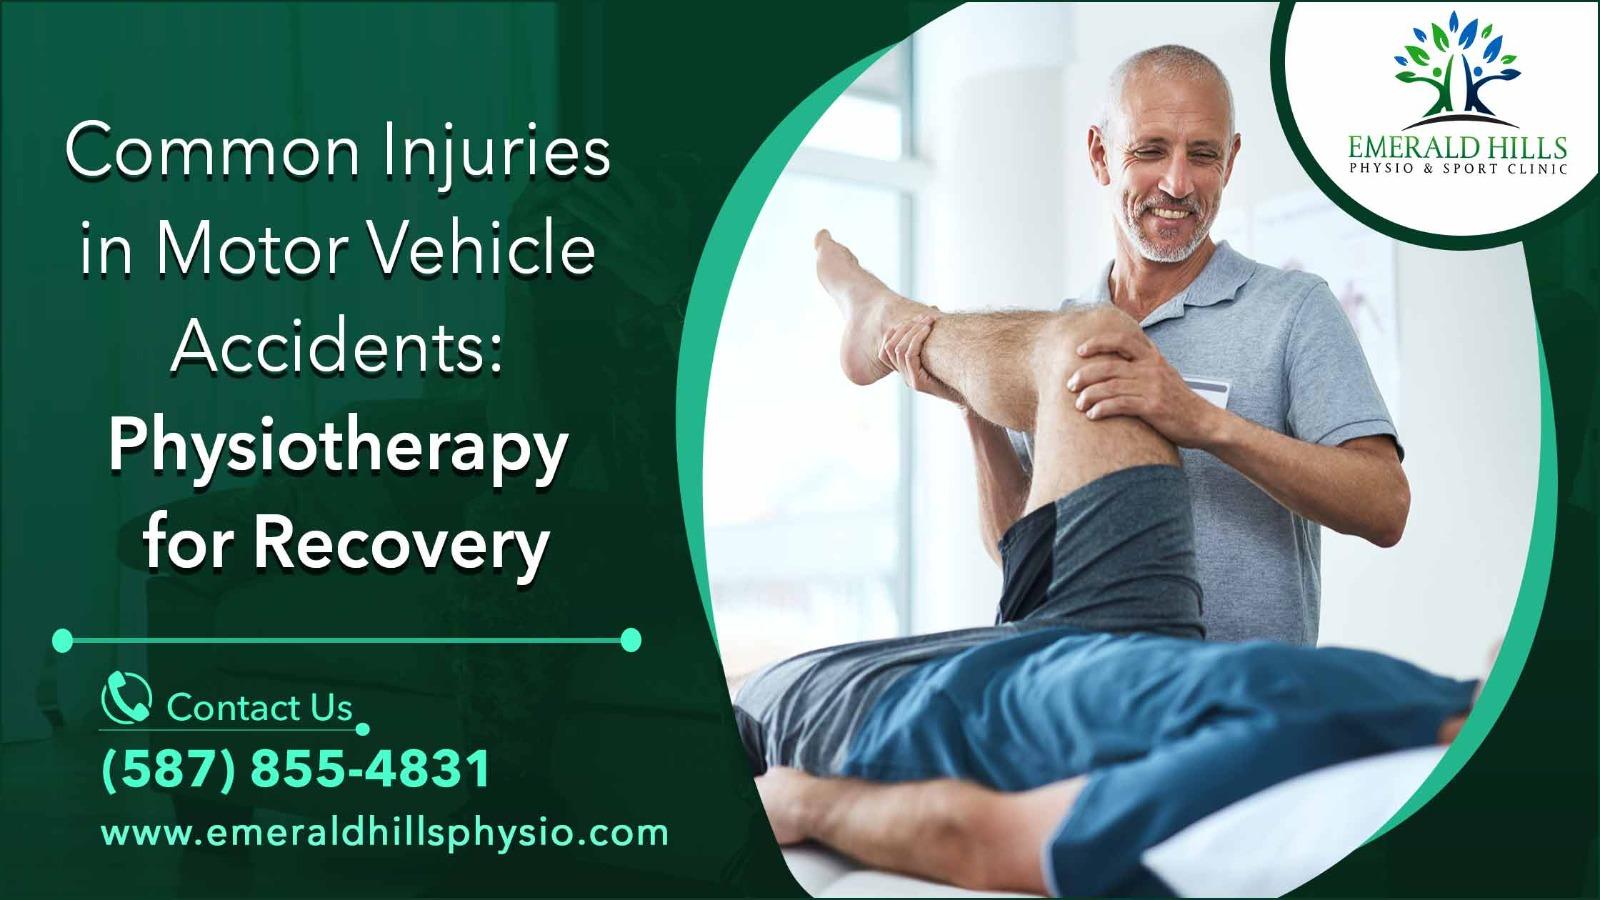 Common Injuries in Motor Vehicle Accidents Physiotherapy for Recovery